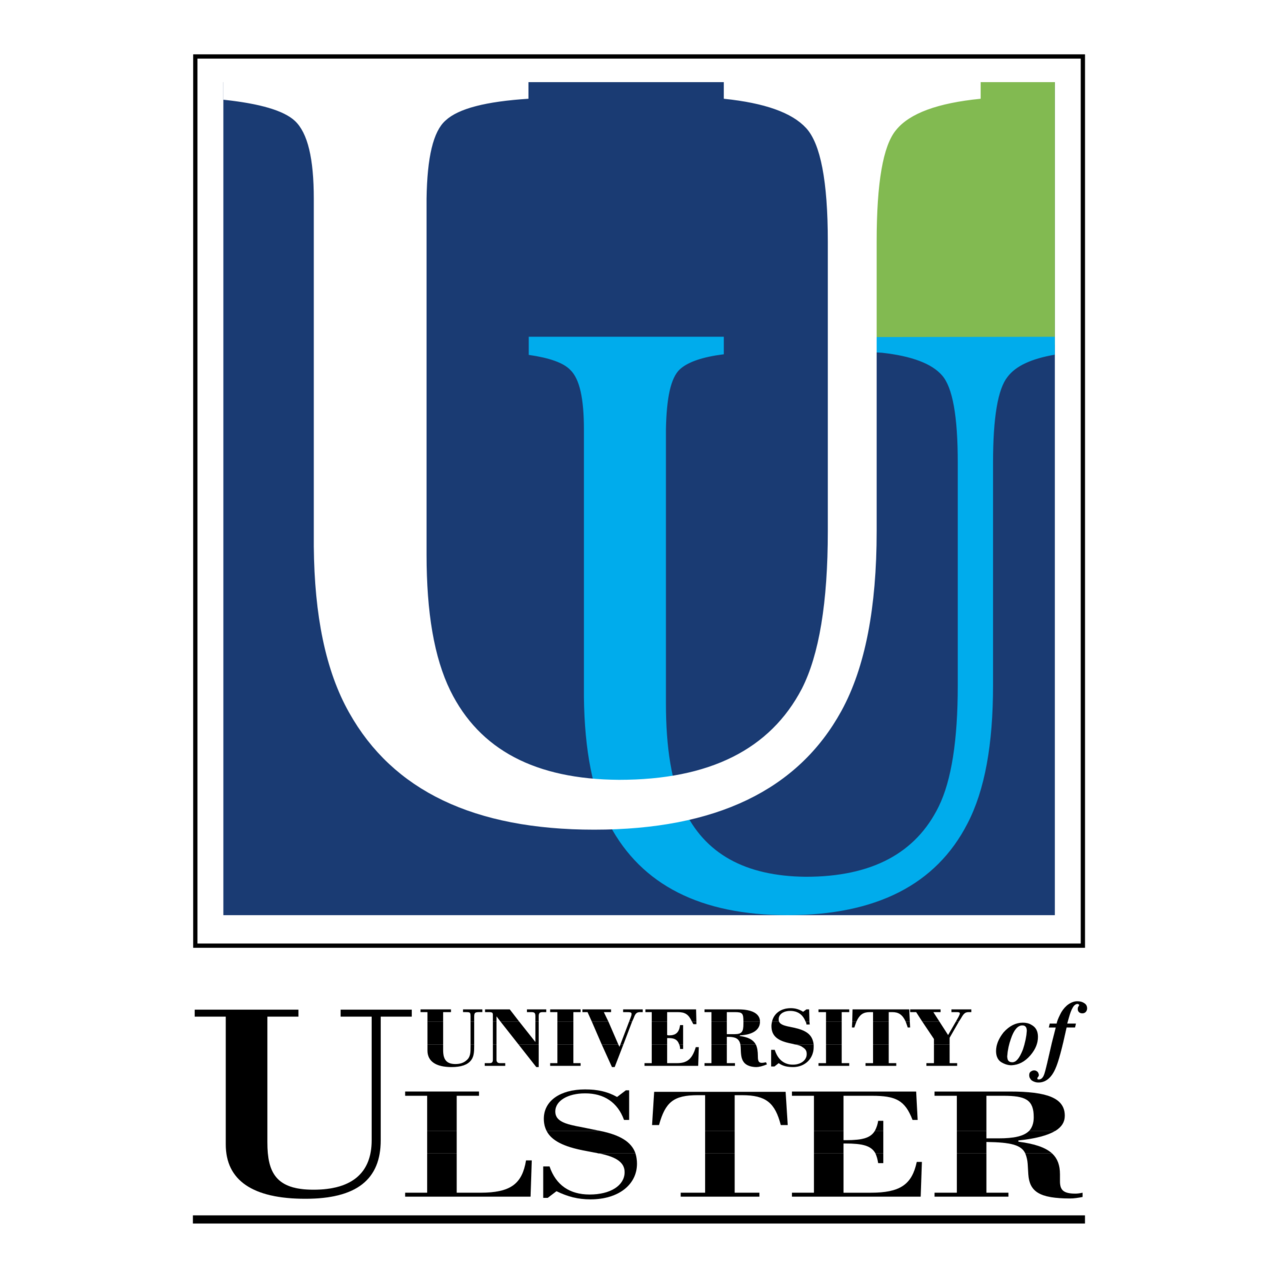 Download University of Ulster Logo PNG and Vector (PDF, SVG, Ai, EPS) Free